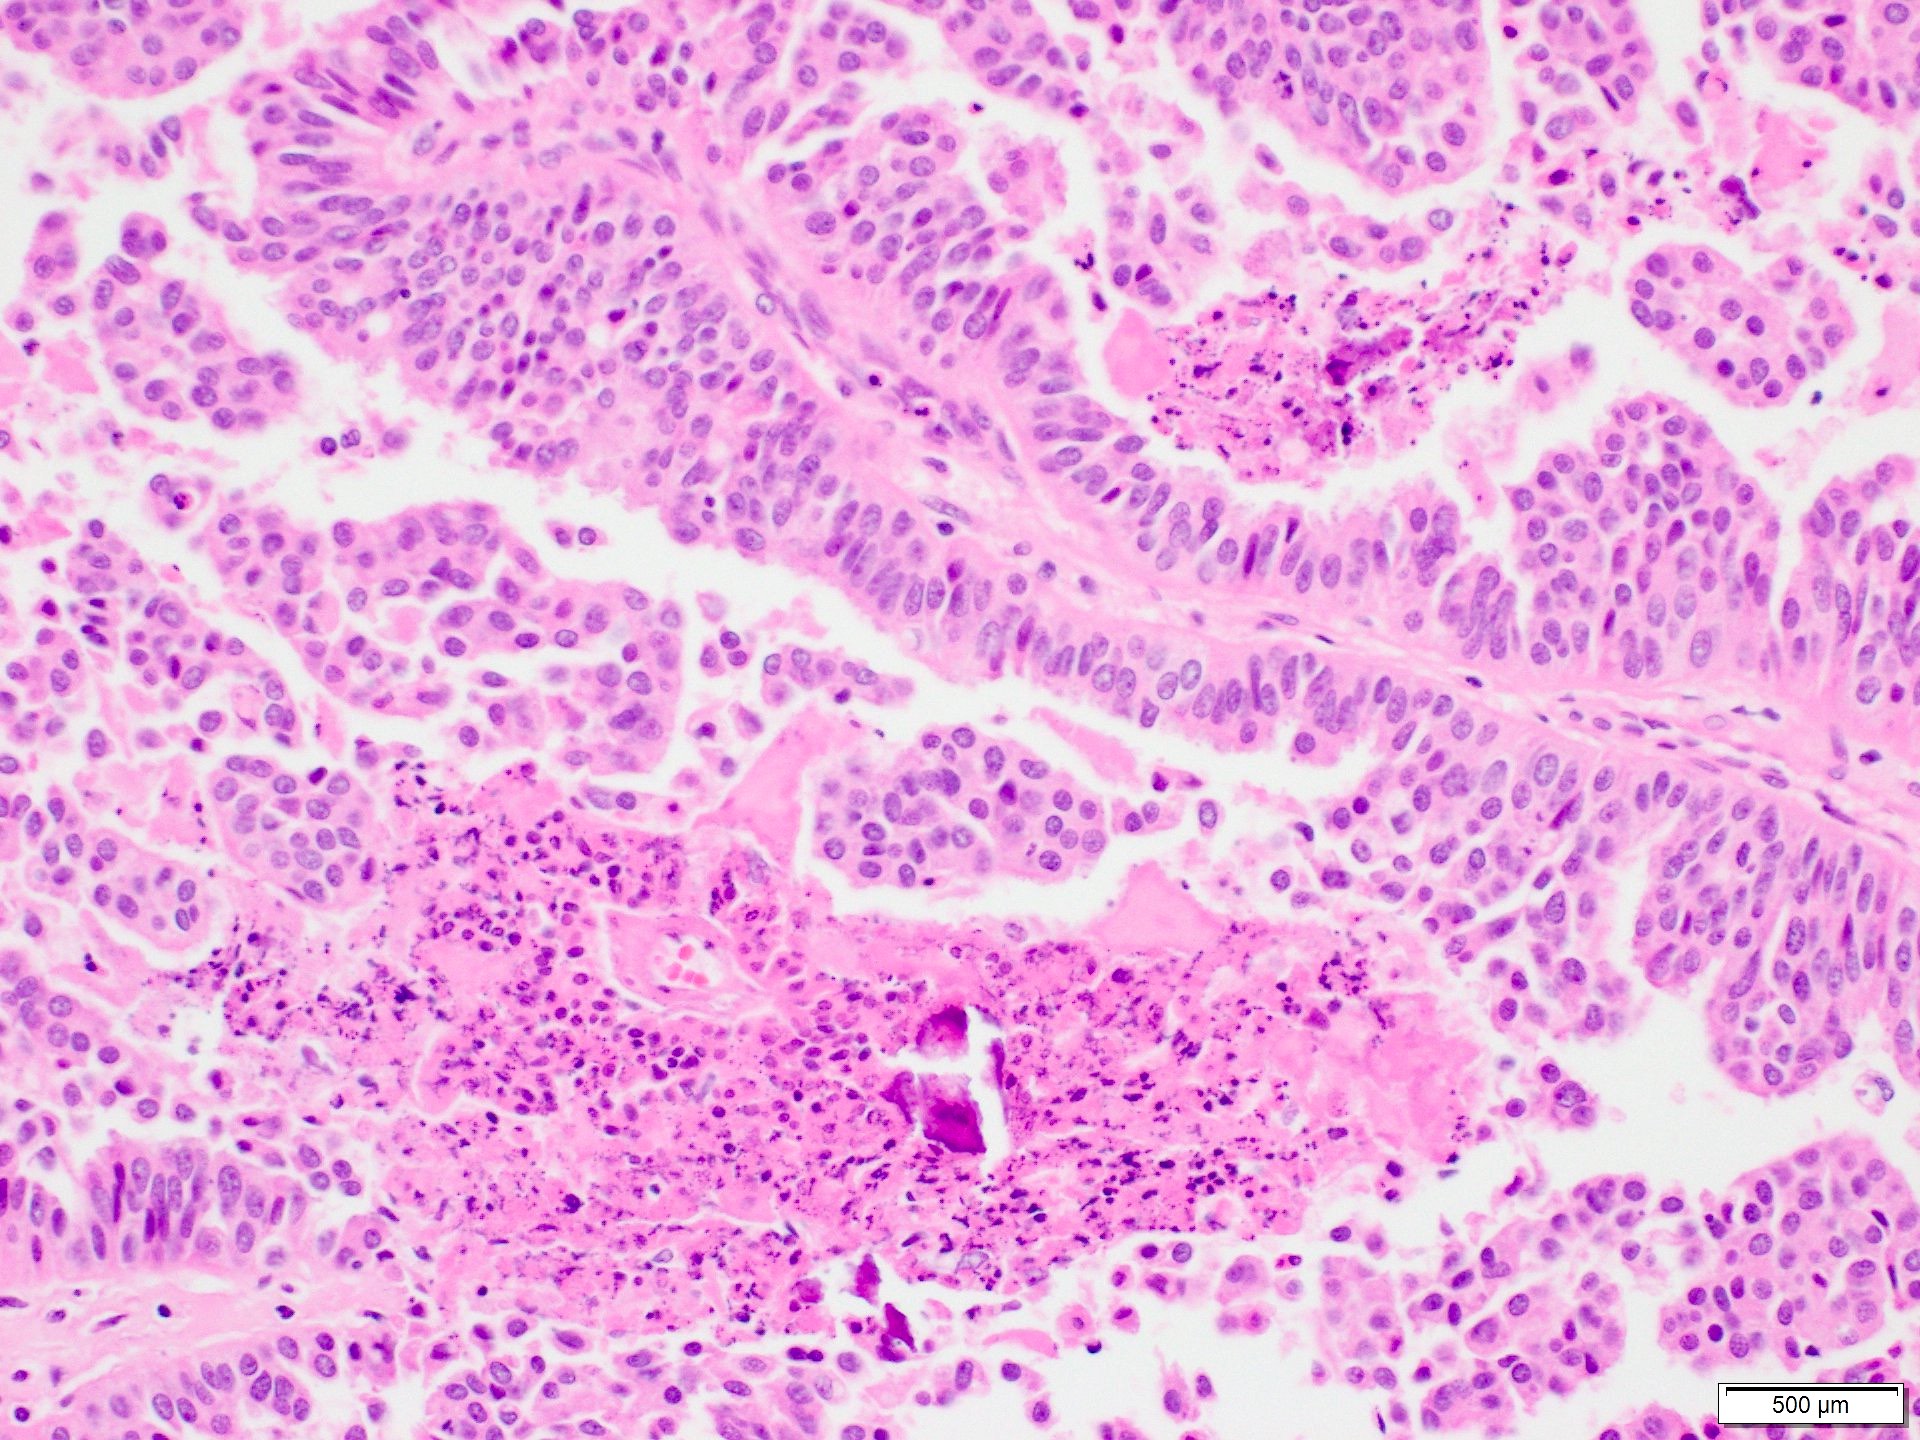 intraductal papilloma with dcis pathology outlines